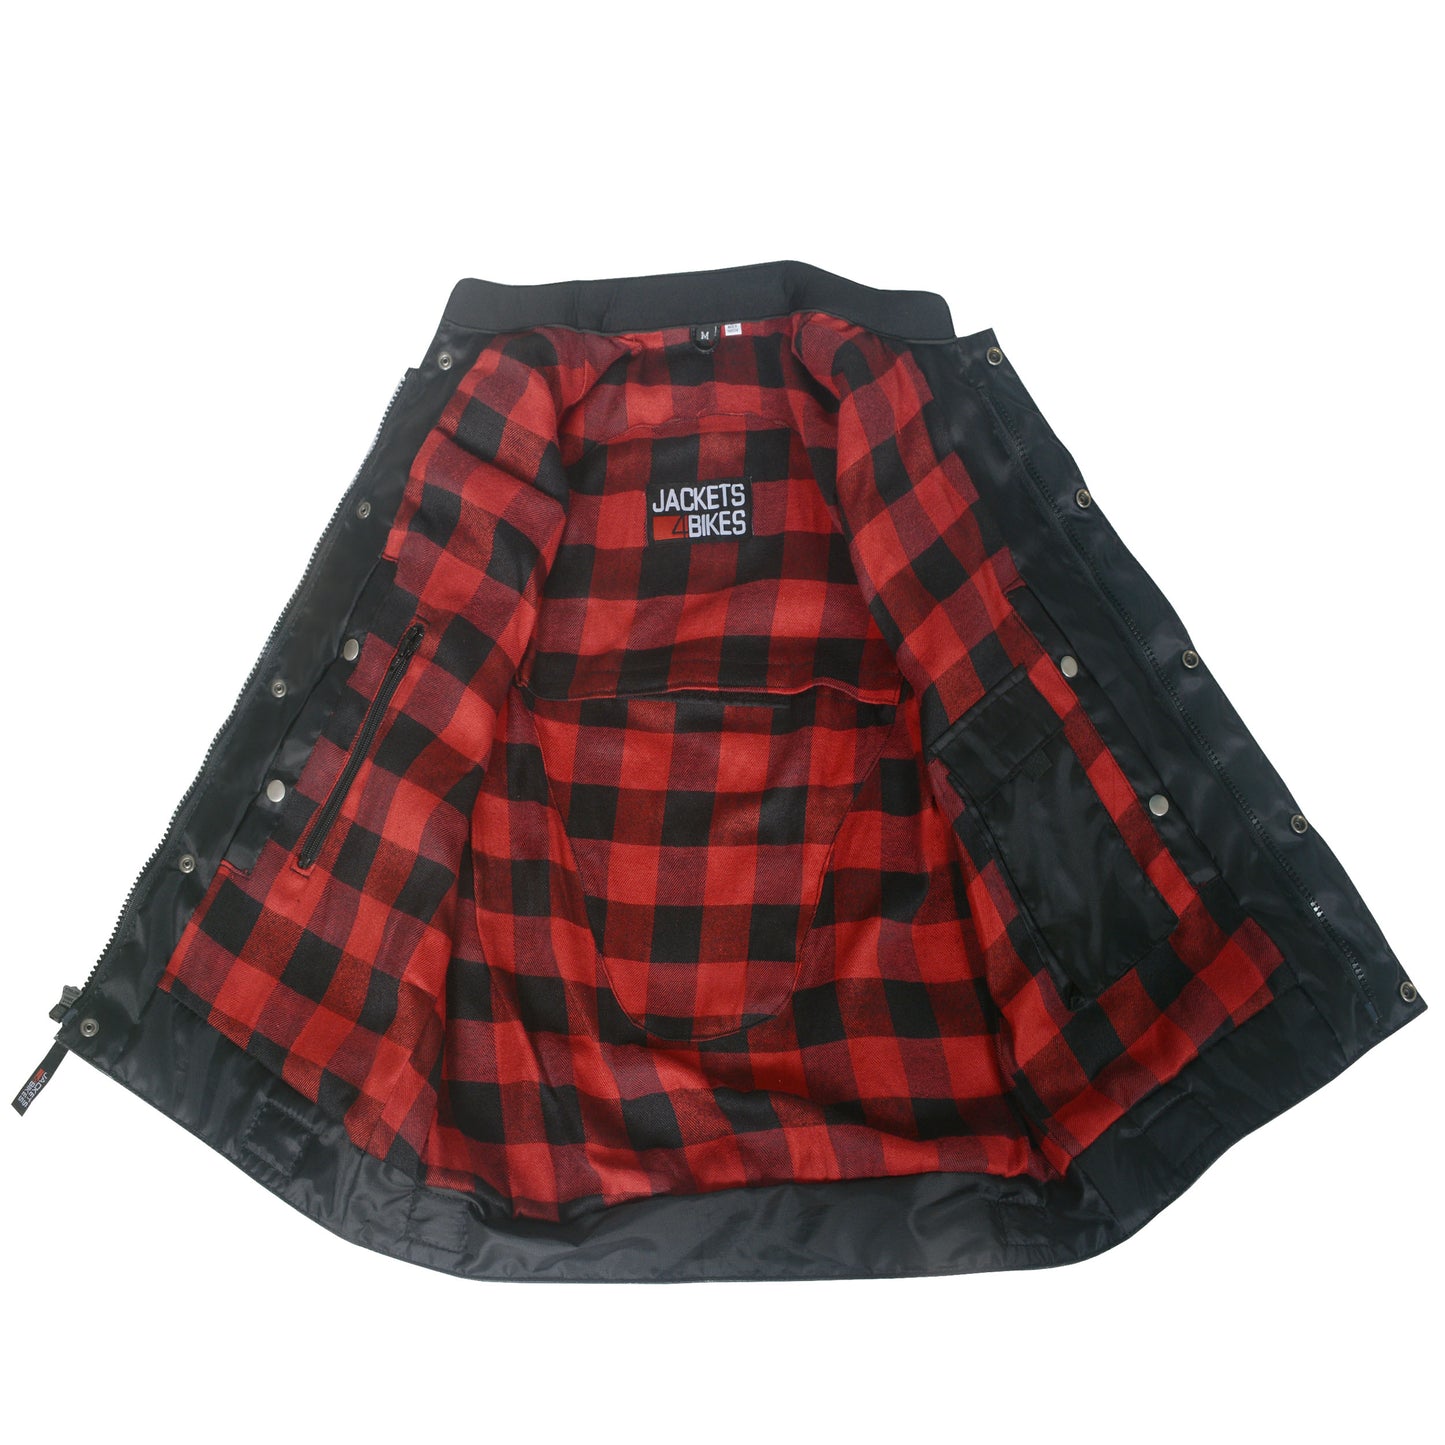 Men's ARMOR Leather SOA Anarchy Motorcycle Biker Club Concealed Carry Vest Flannel Red